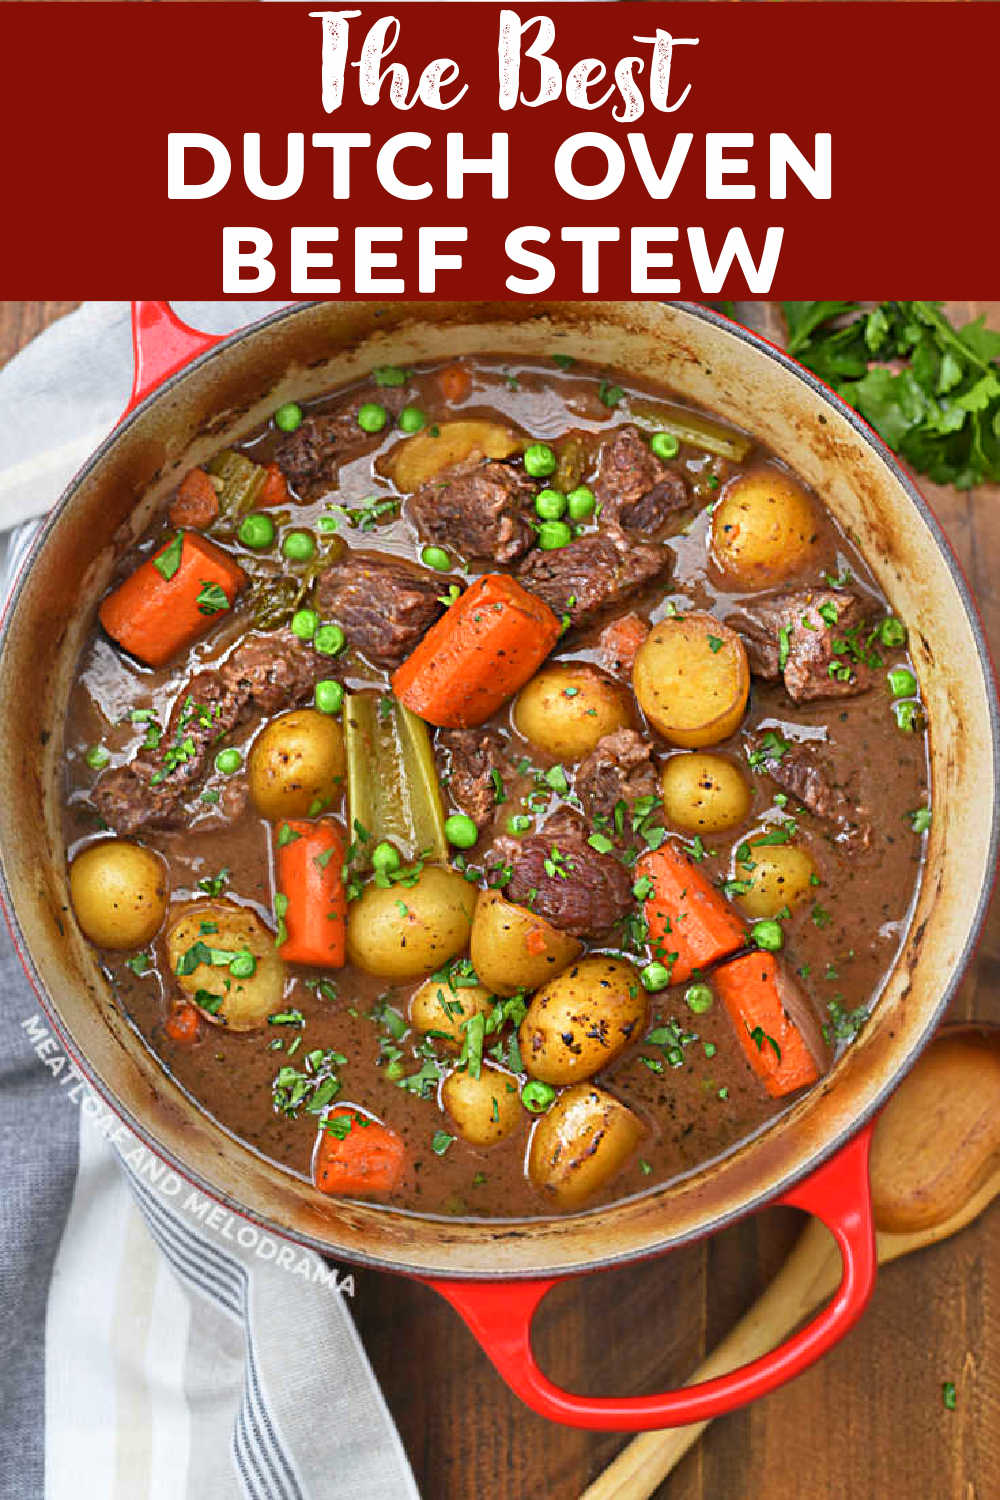 The Best Dutch Oven Beef Stew Recipe with red wine, carrots, potatoes cooks low and slow until tender and delicious. Easy comfort food! This classic beef stew recipe is a one-pot meal the whole family will love! via @meamel